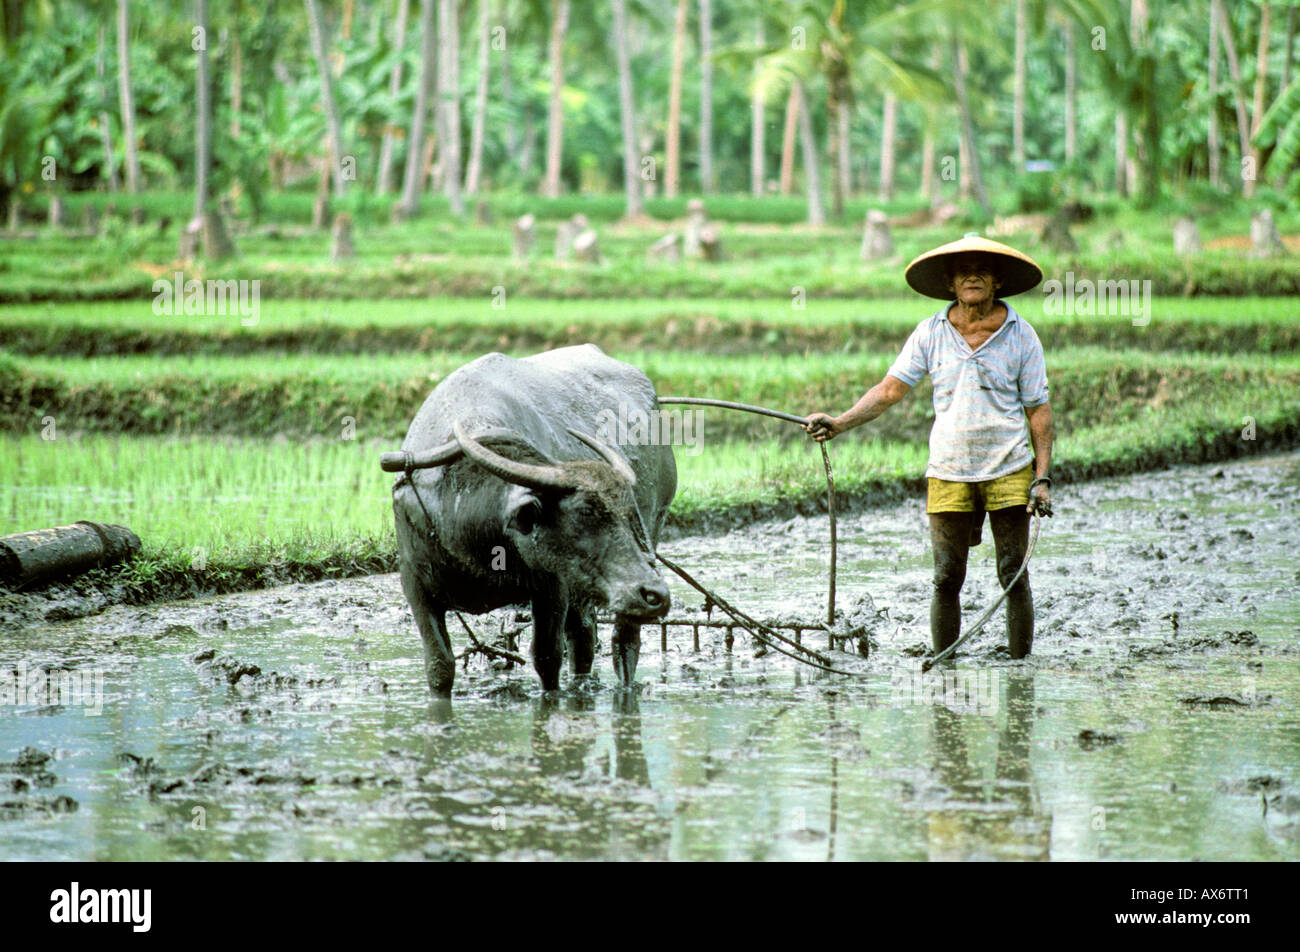 Ploughing wet rice paddy field with water buffalo Cebu Philippines Stock Photo